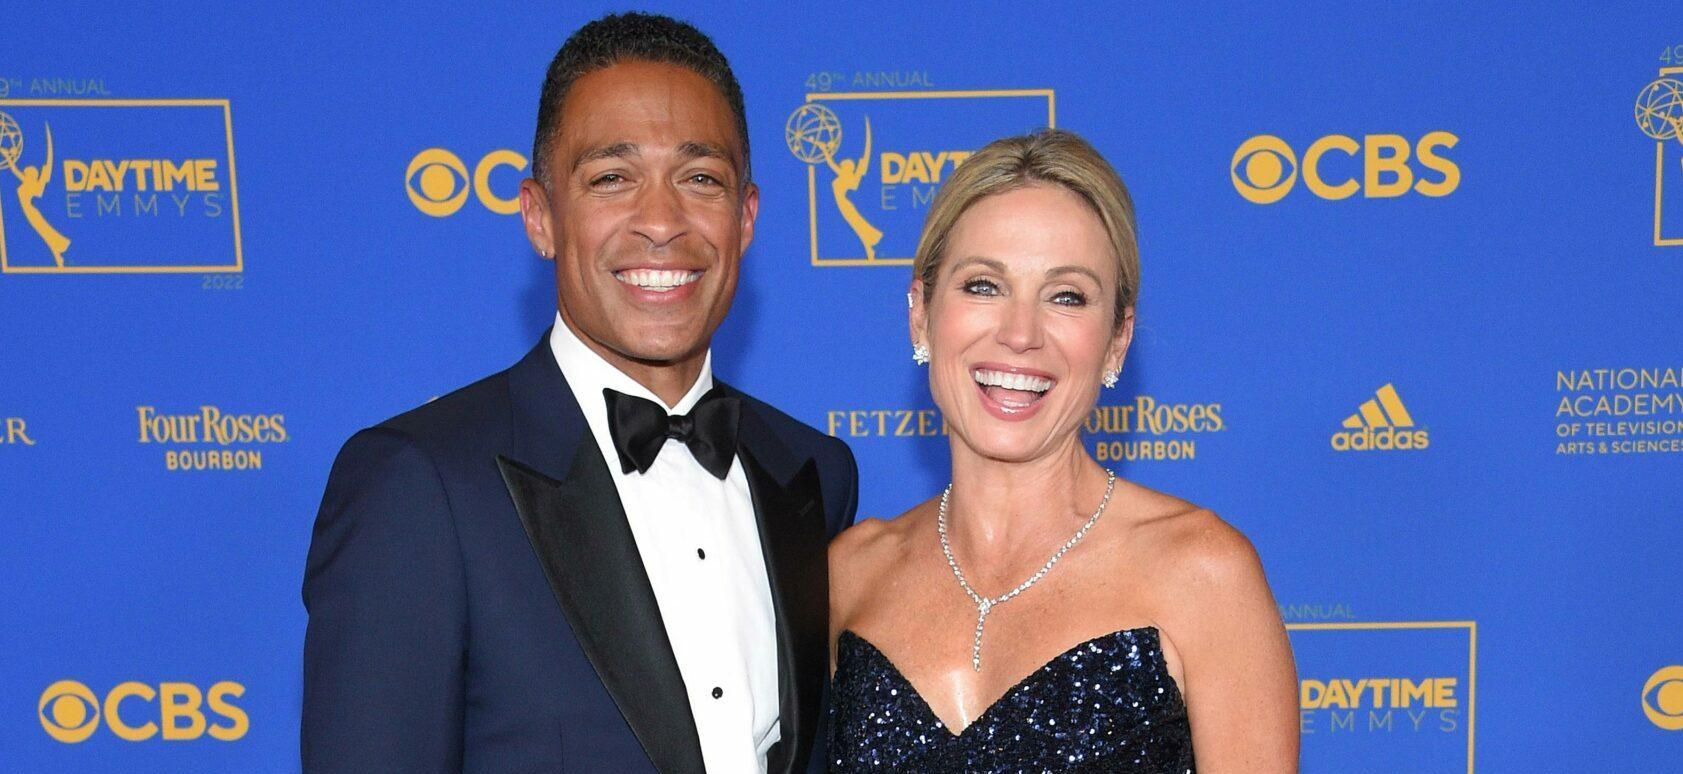 ‘GMA’ Hosts Amy Robach And T.J. Holmes Reportedly Going Full Steam Ahead With Their Romance